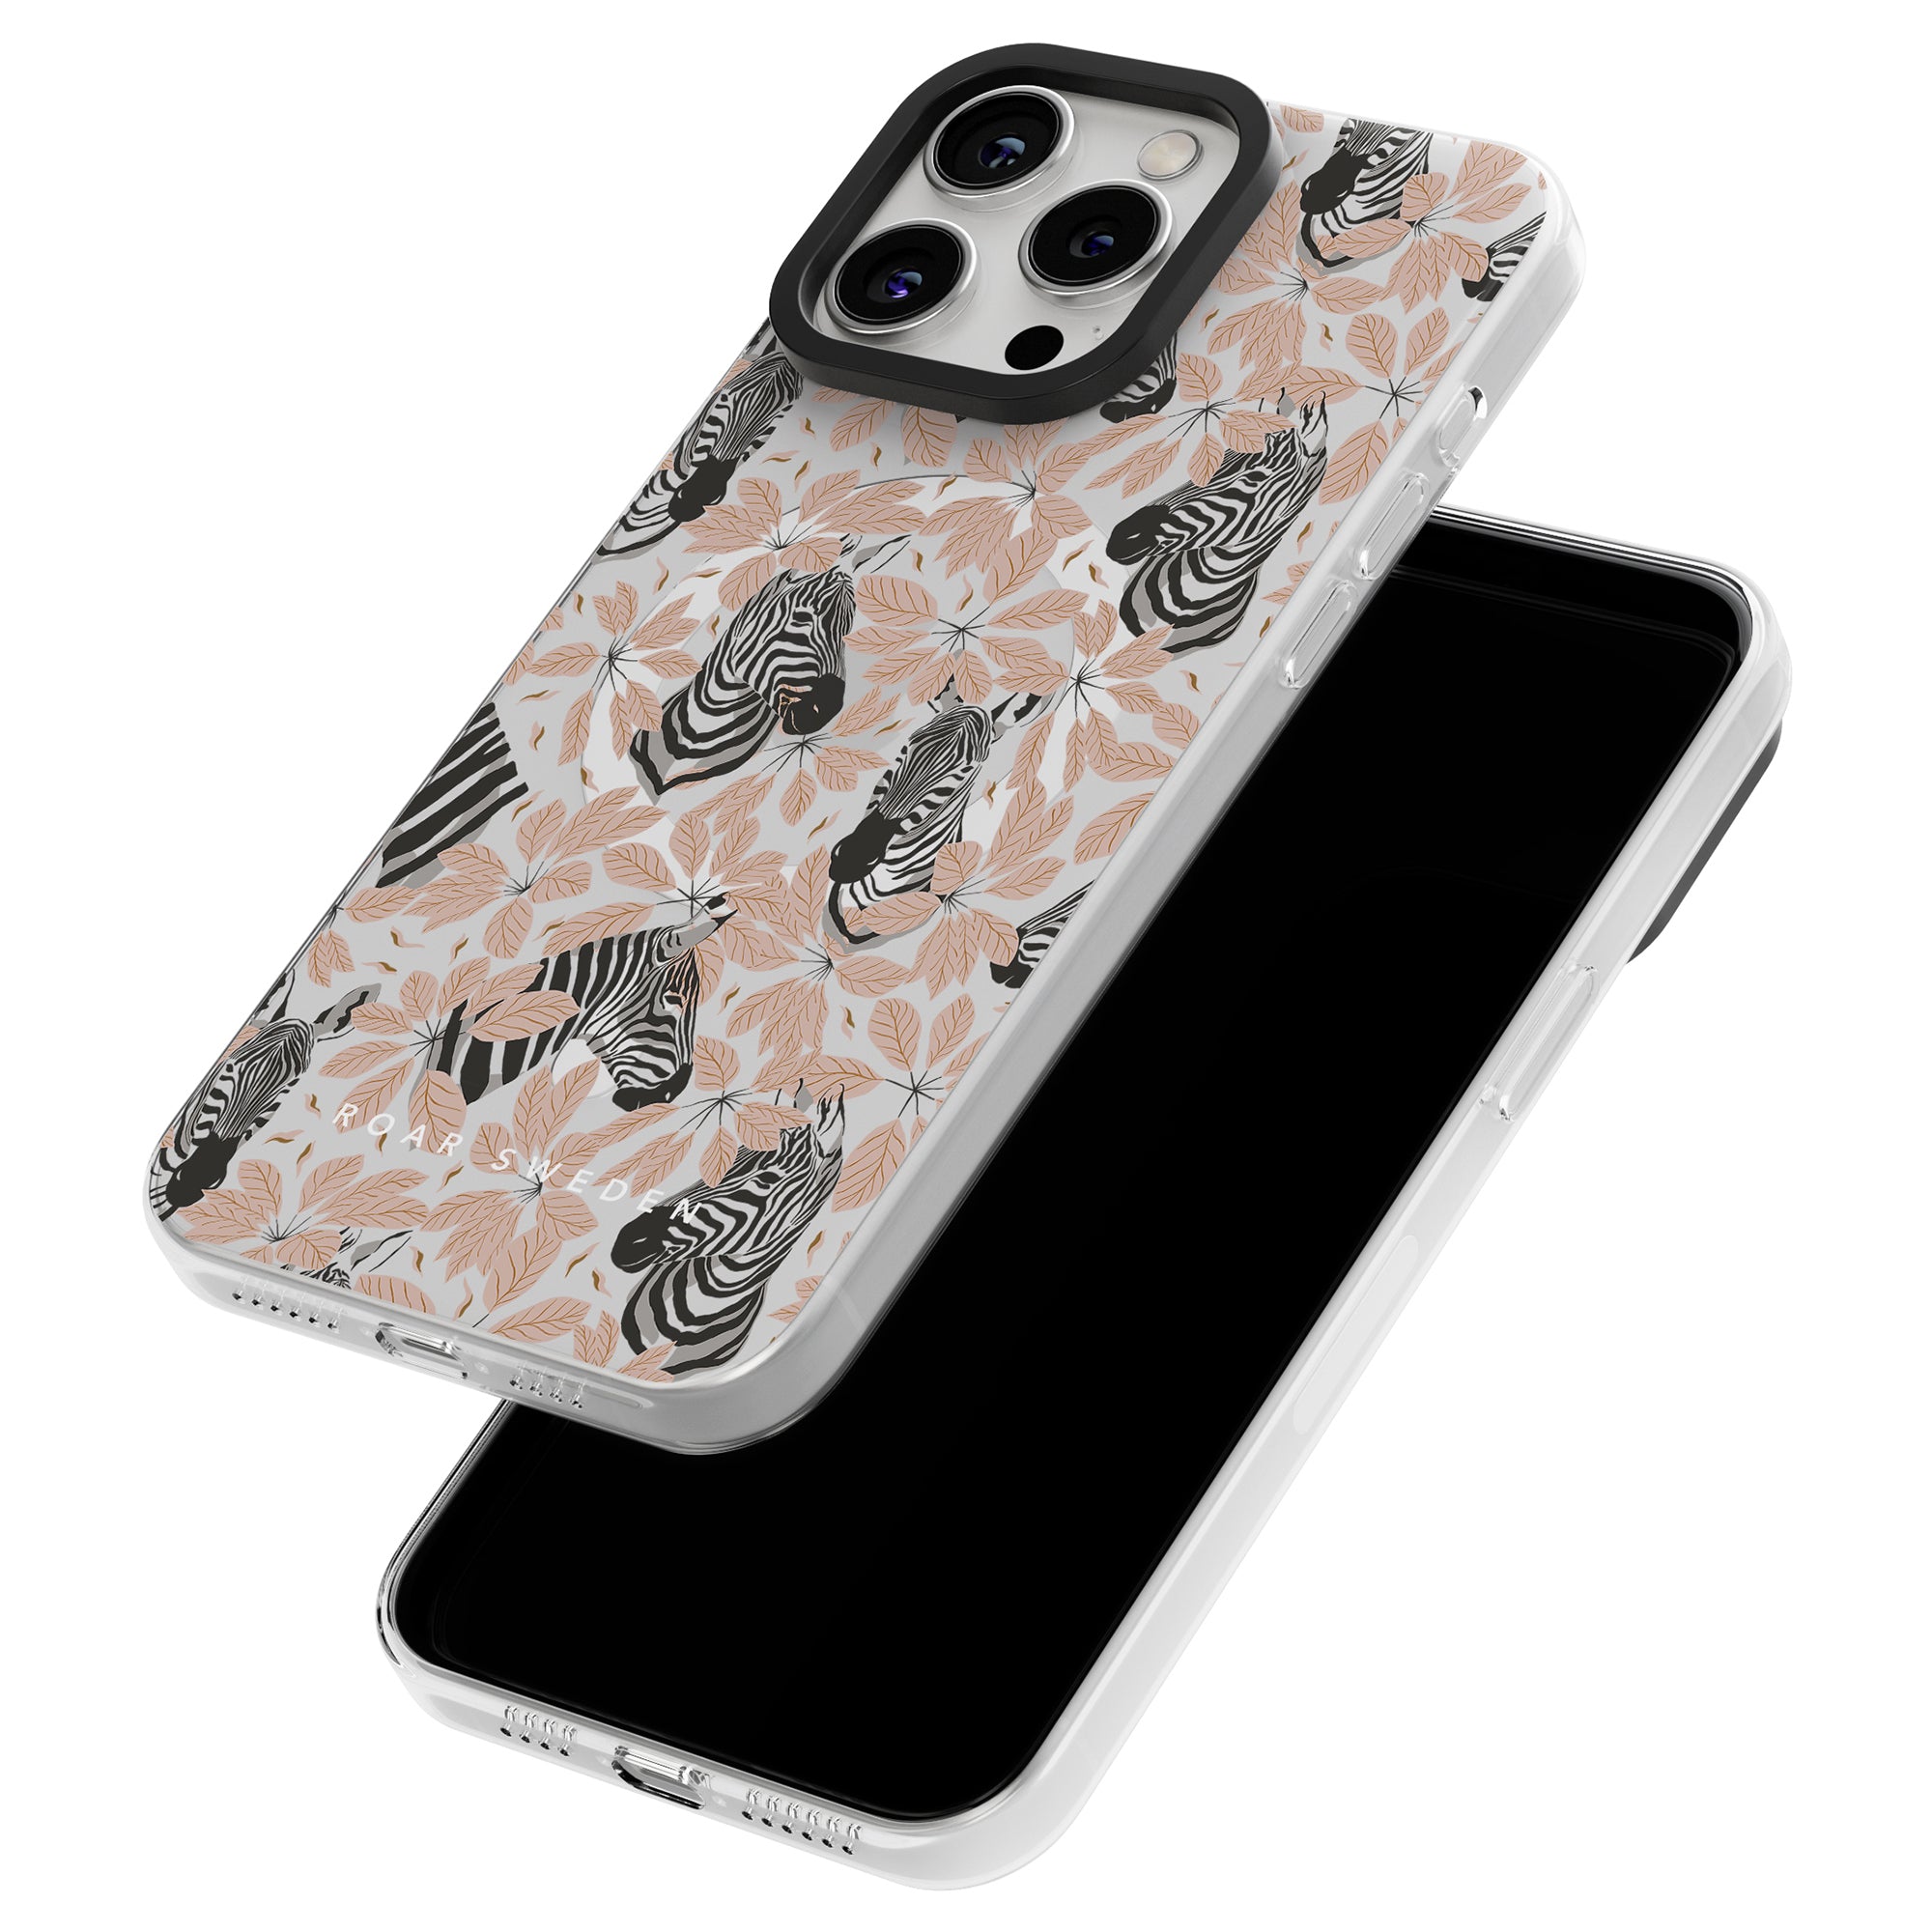 Two smartphones in decorative Toto - MagSafe fodral. The cases, part of the Zebra Collection, feature zebras and leaves in a monochrome and beige palette. One phone is face down showing the patterned back, while the other displays its screen, ensuring robust skydd with style.